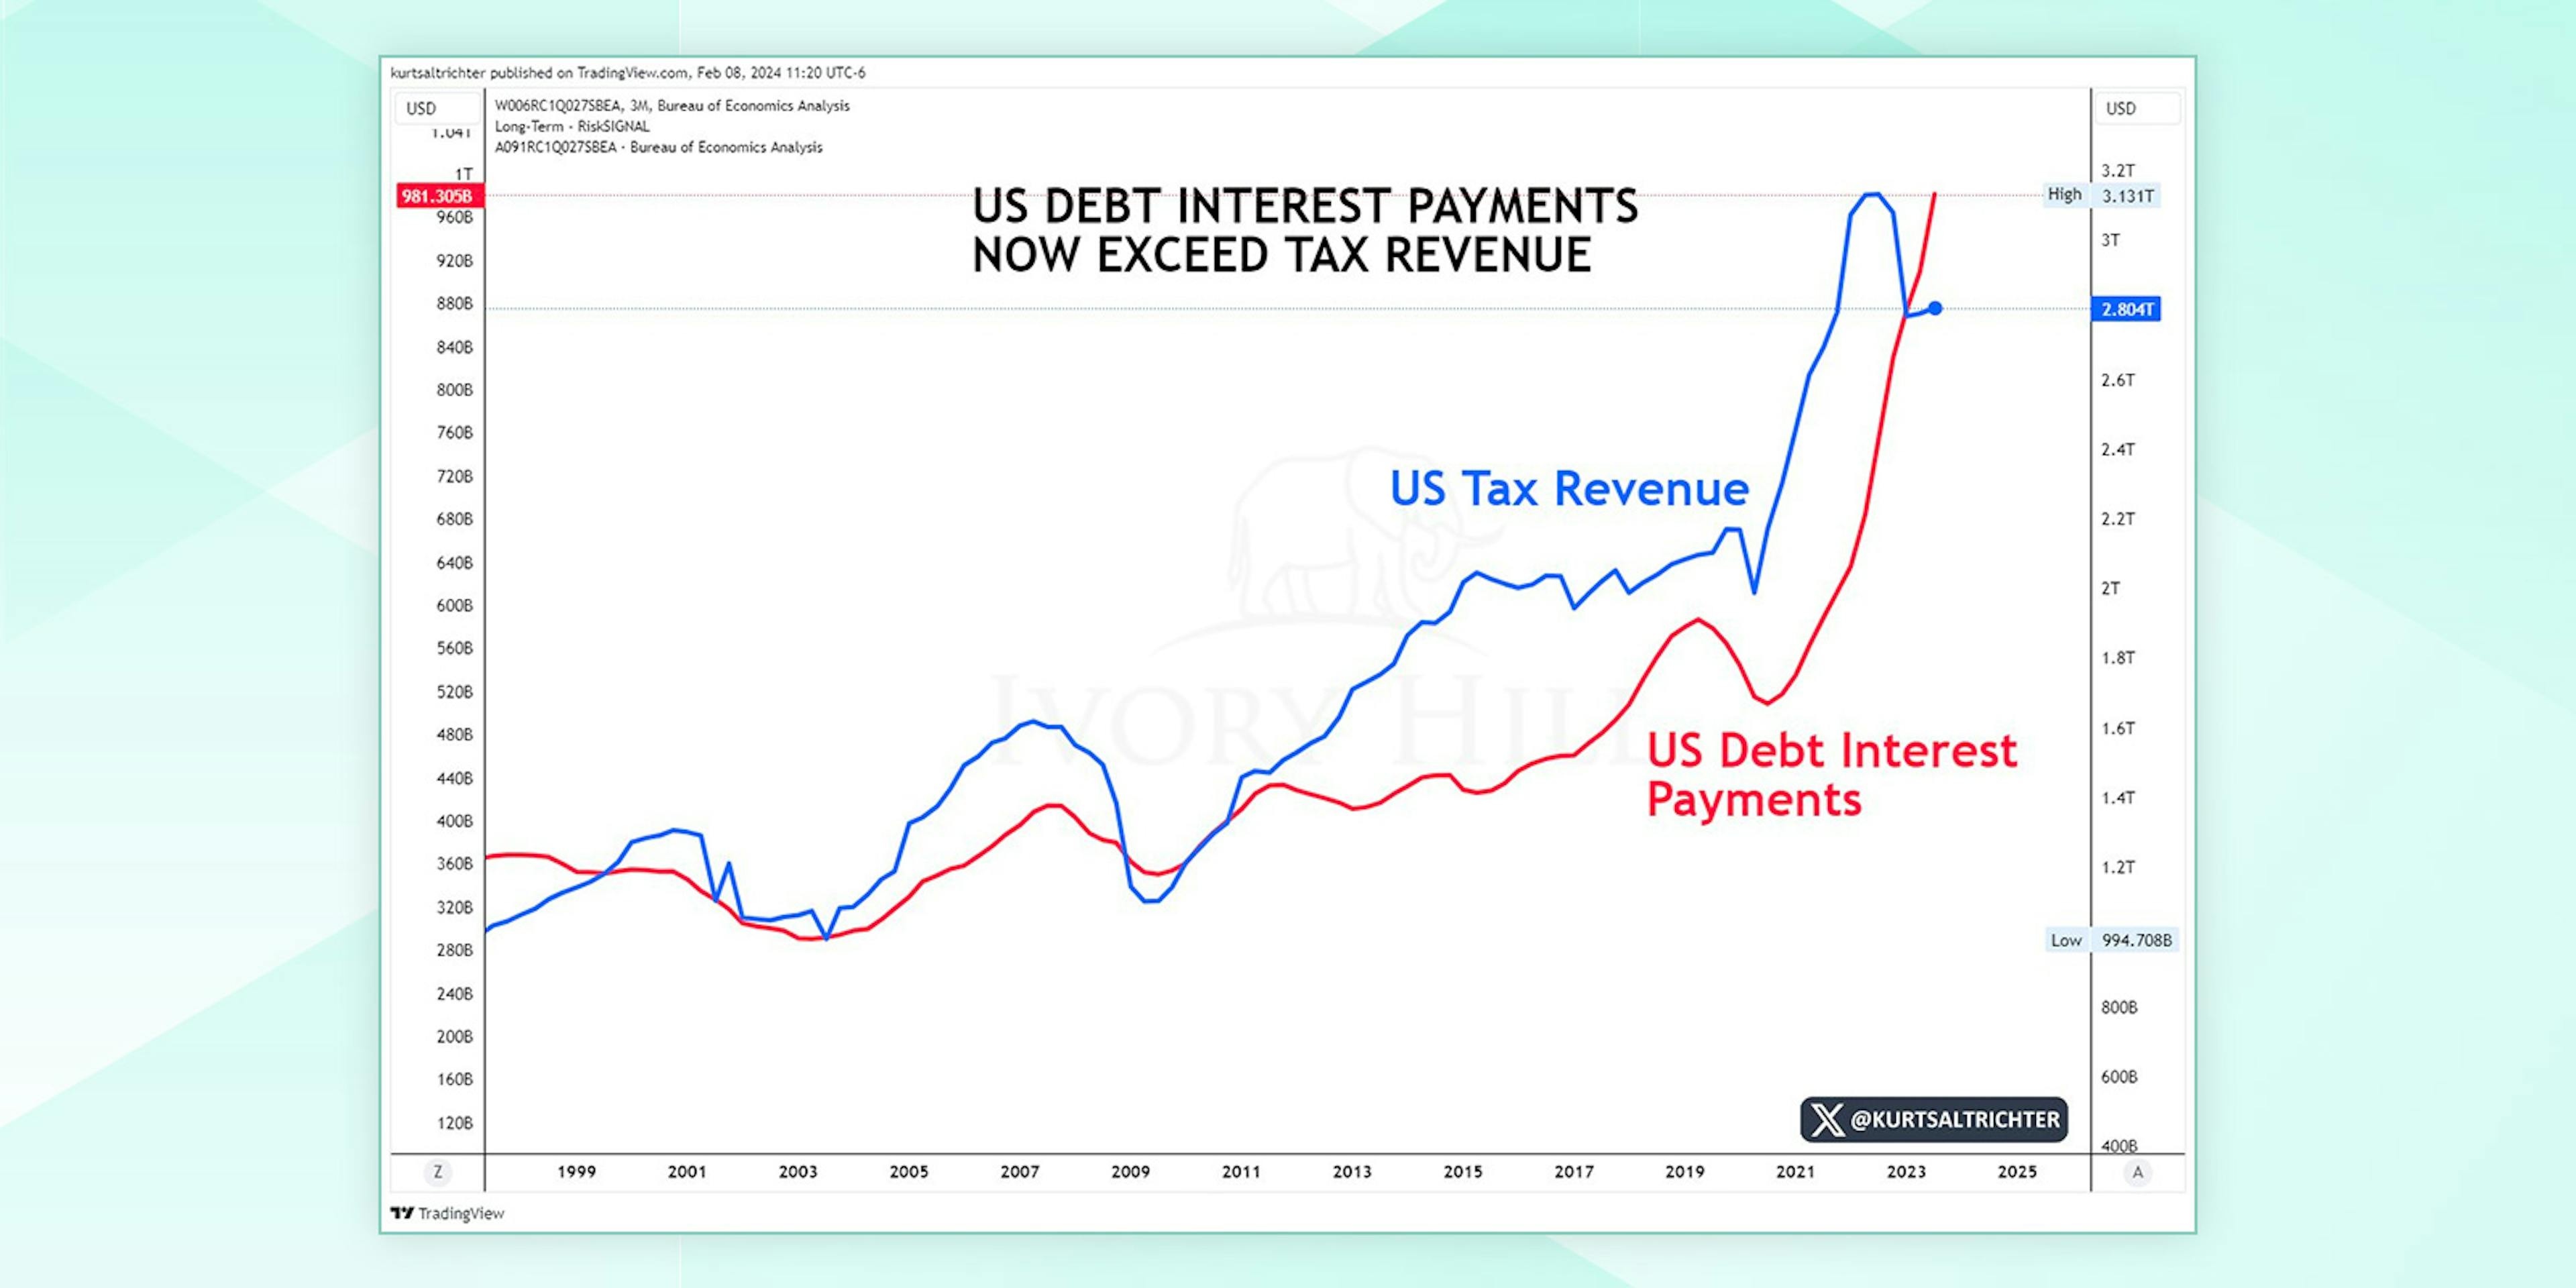 US debt interest payments now exceed tax revenue